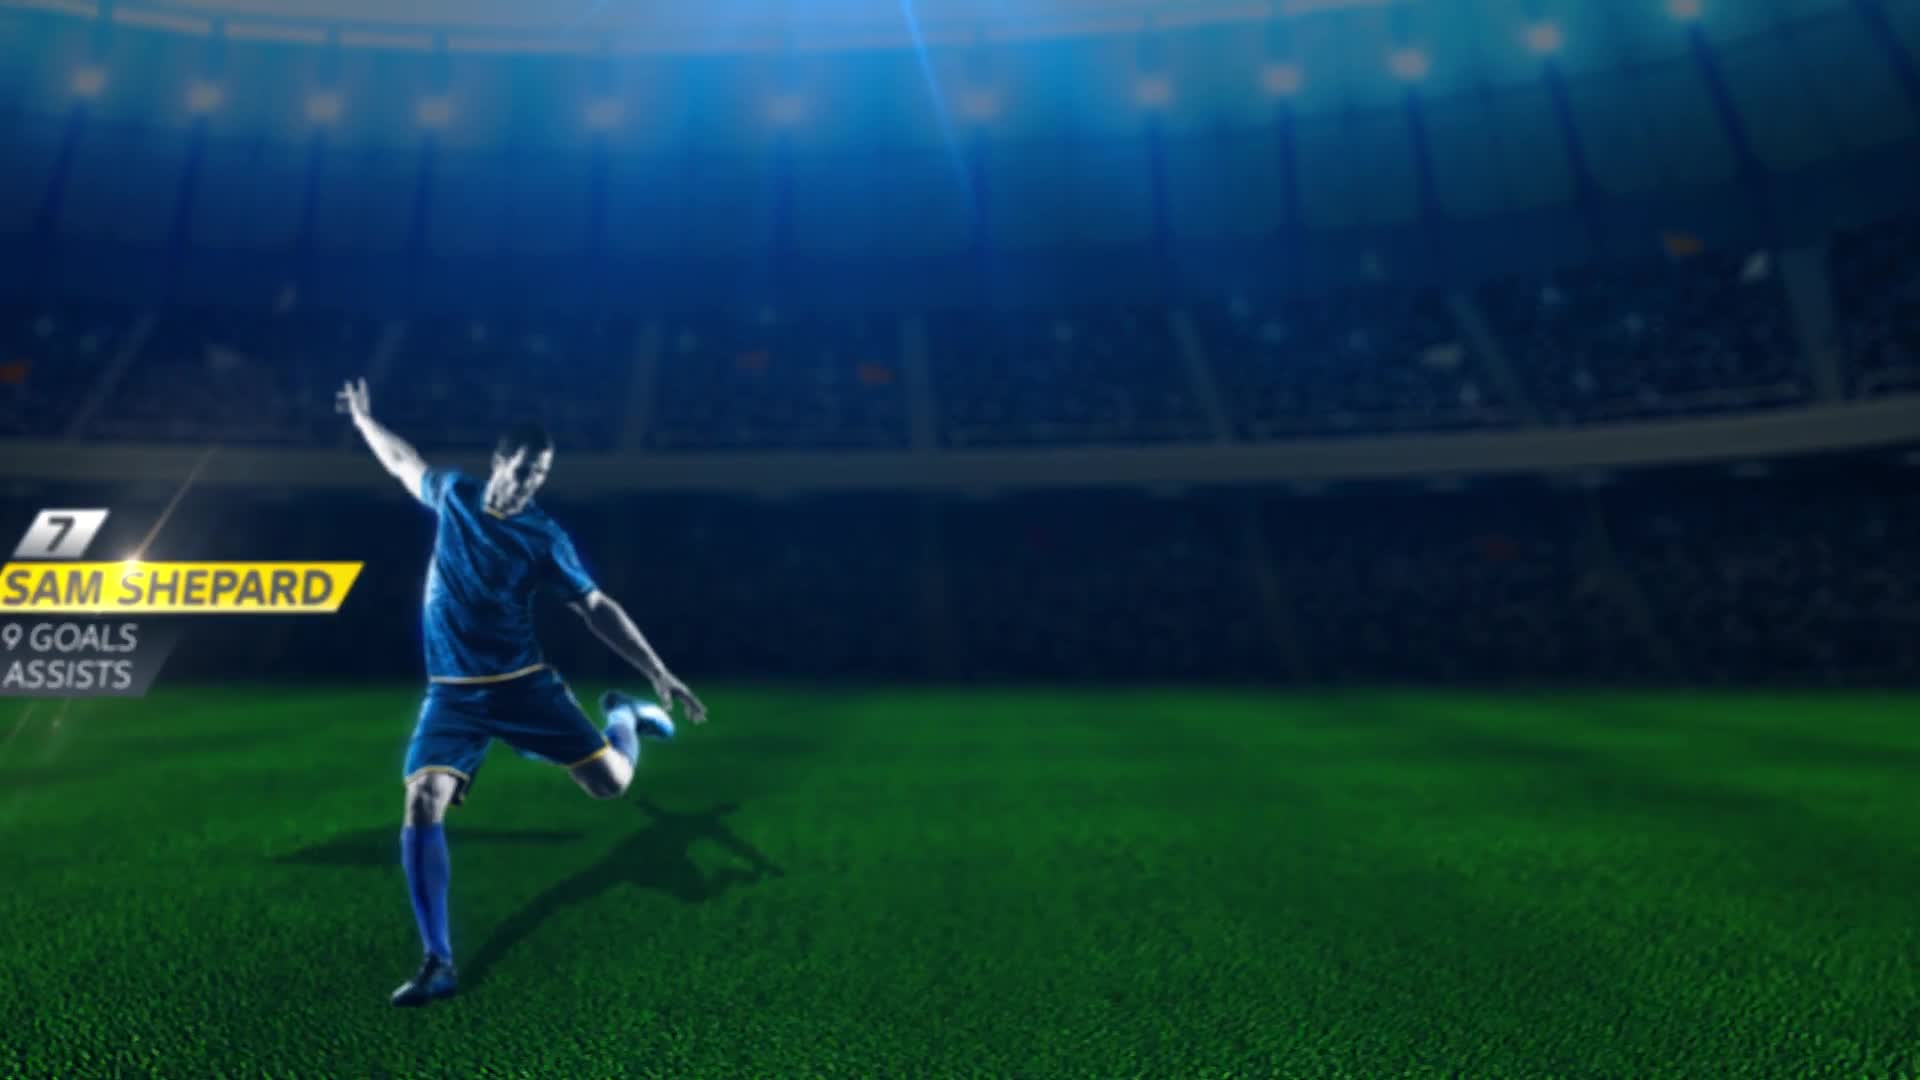 after effects project files soccerworld videohive free download